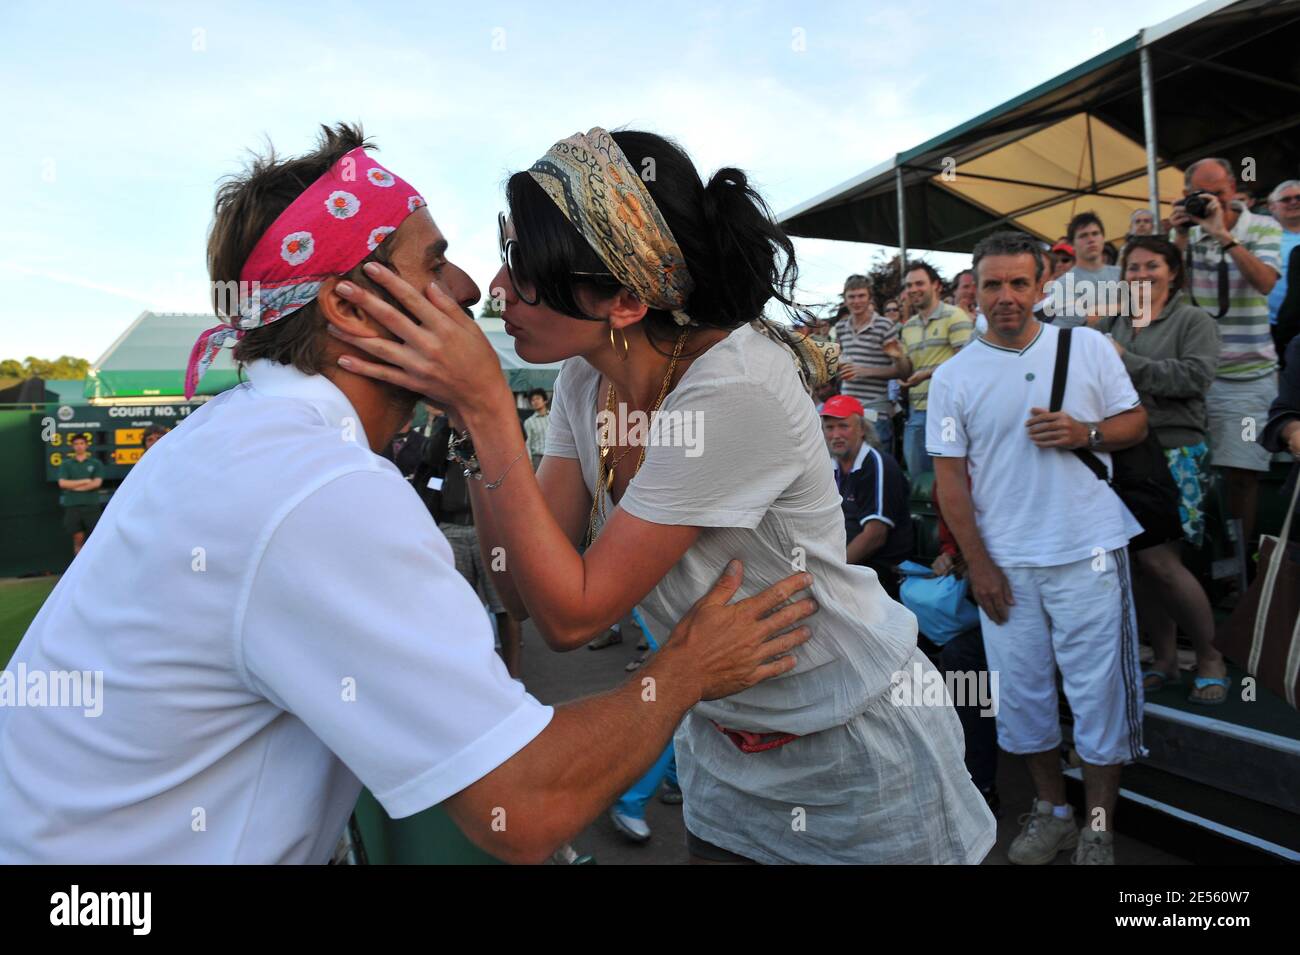 French singer Nolwenn Leroy kisses her boyfriend France's Arnaud Clement  after his victory against Crooatia's Marin Cilic in their fourth round of  the Wimbledon tennis championships in London, UK on June 30,